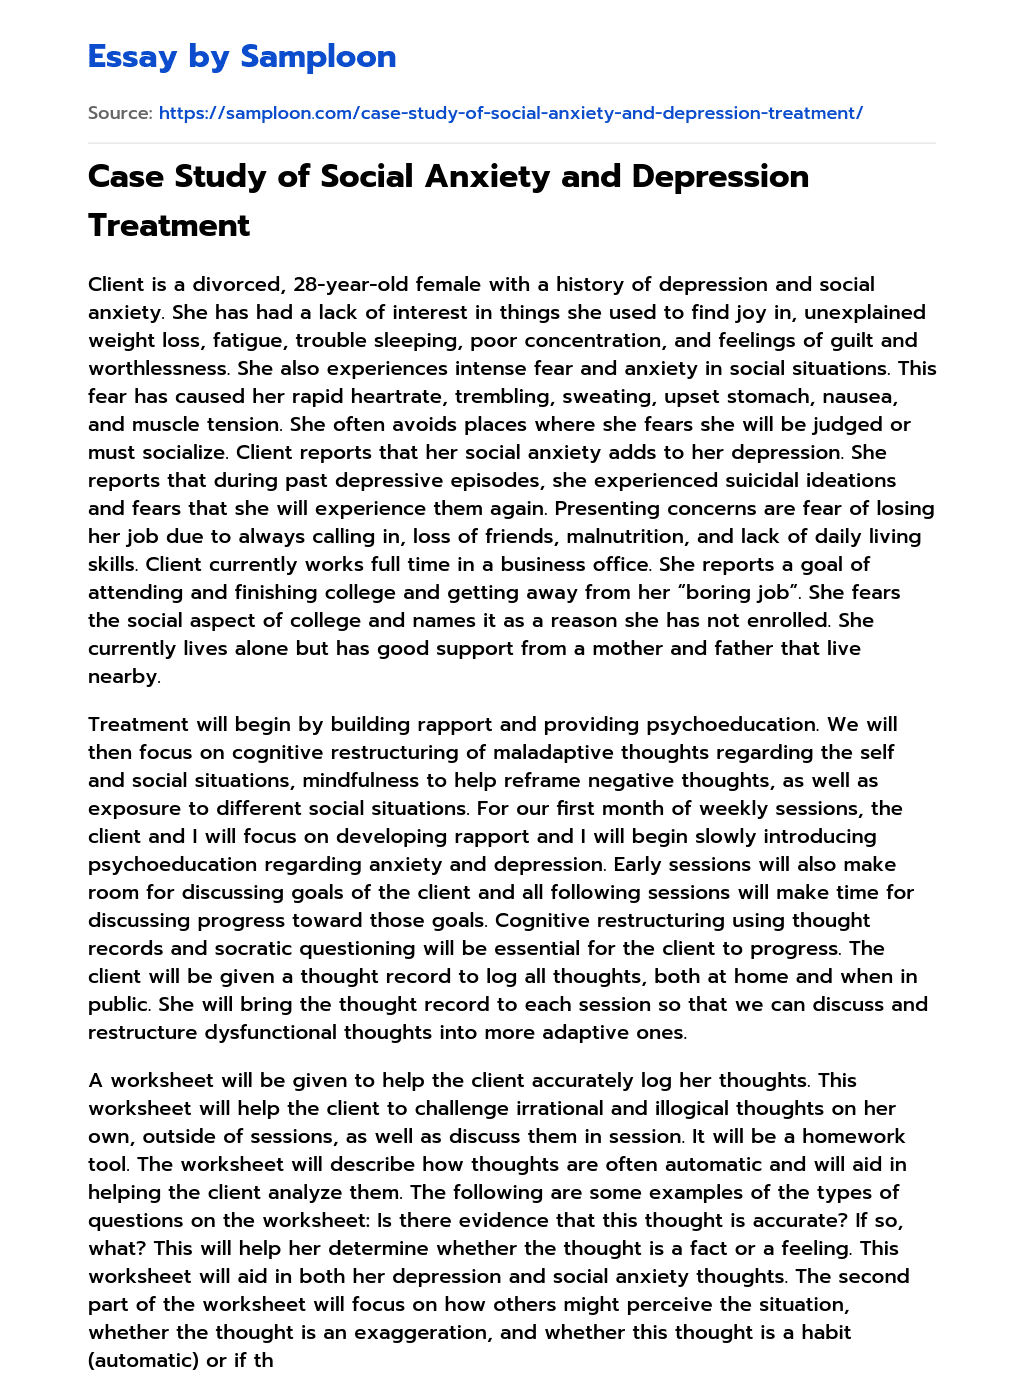 essay about depression and anxiety